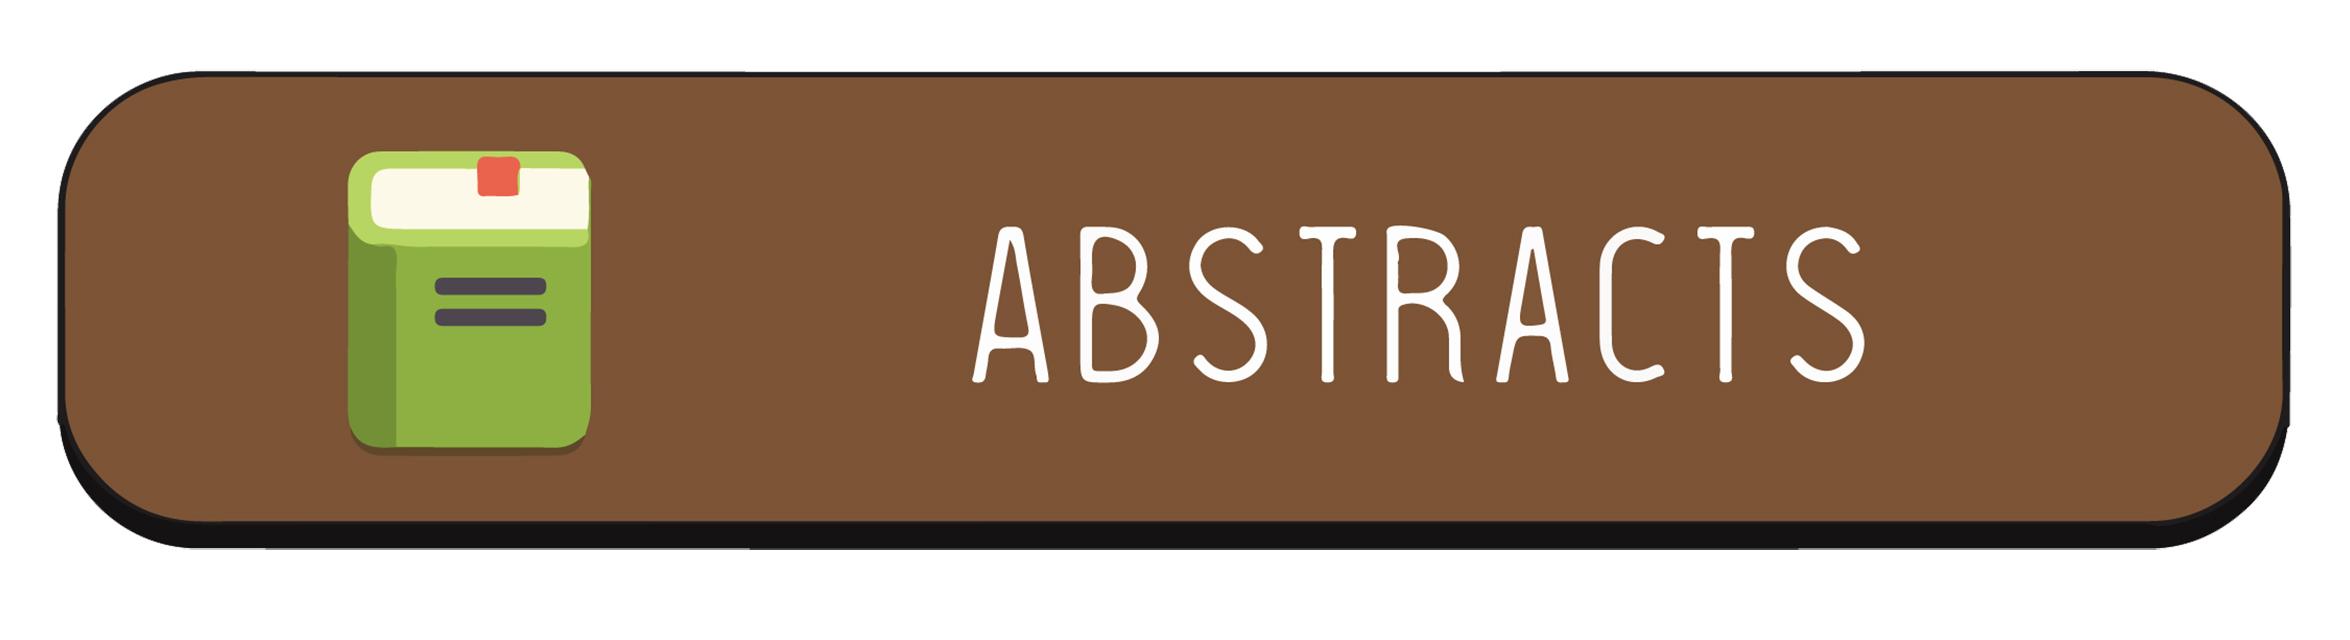 Abstracts Button